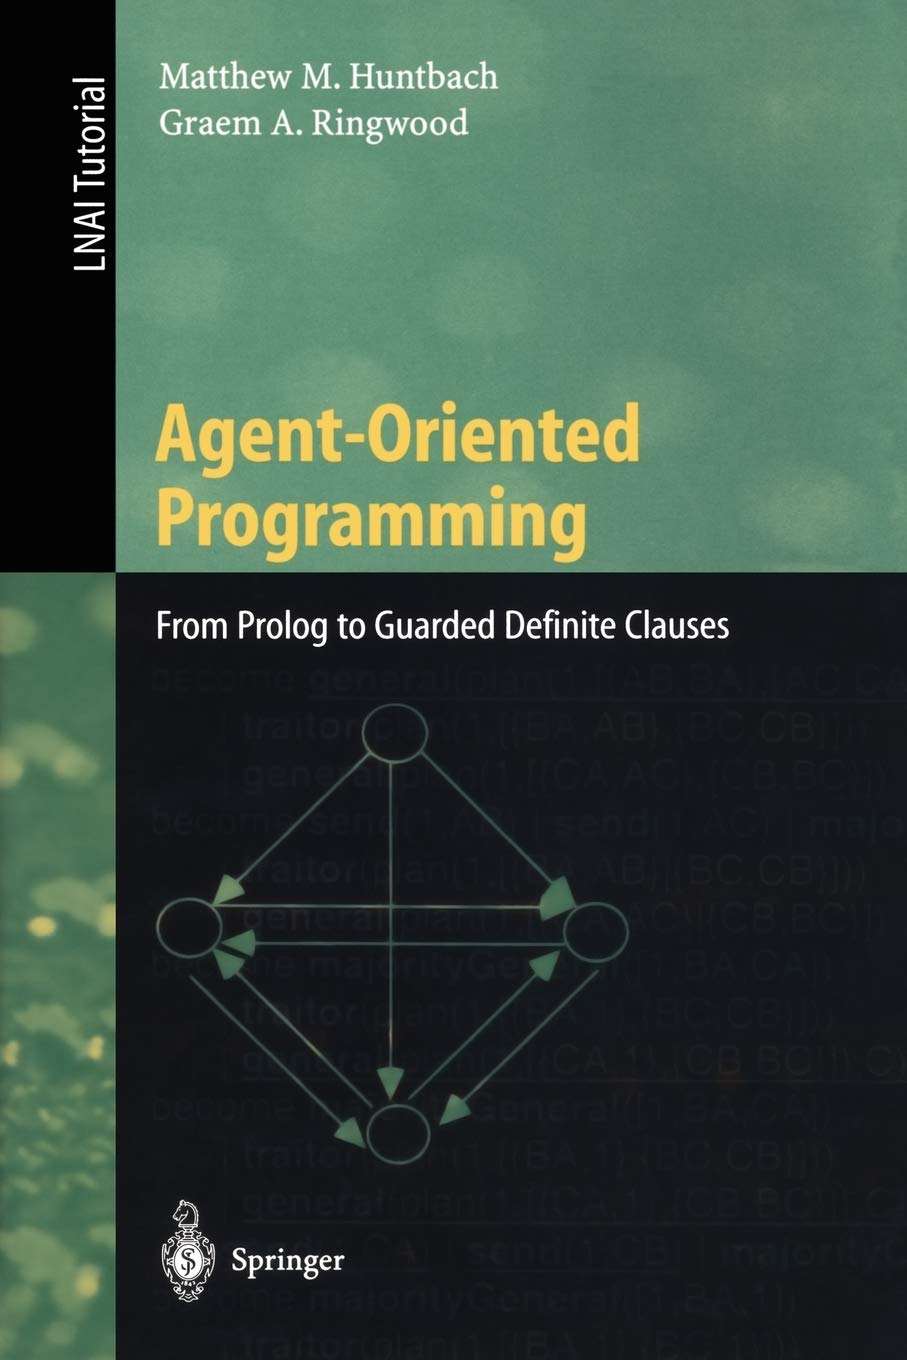 Agent-Oriented Programming: From Prolog to Guarded Definite Clauses